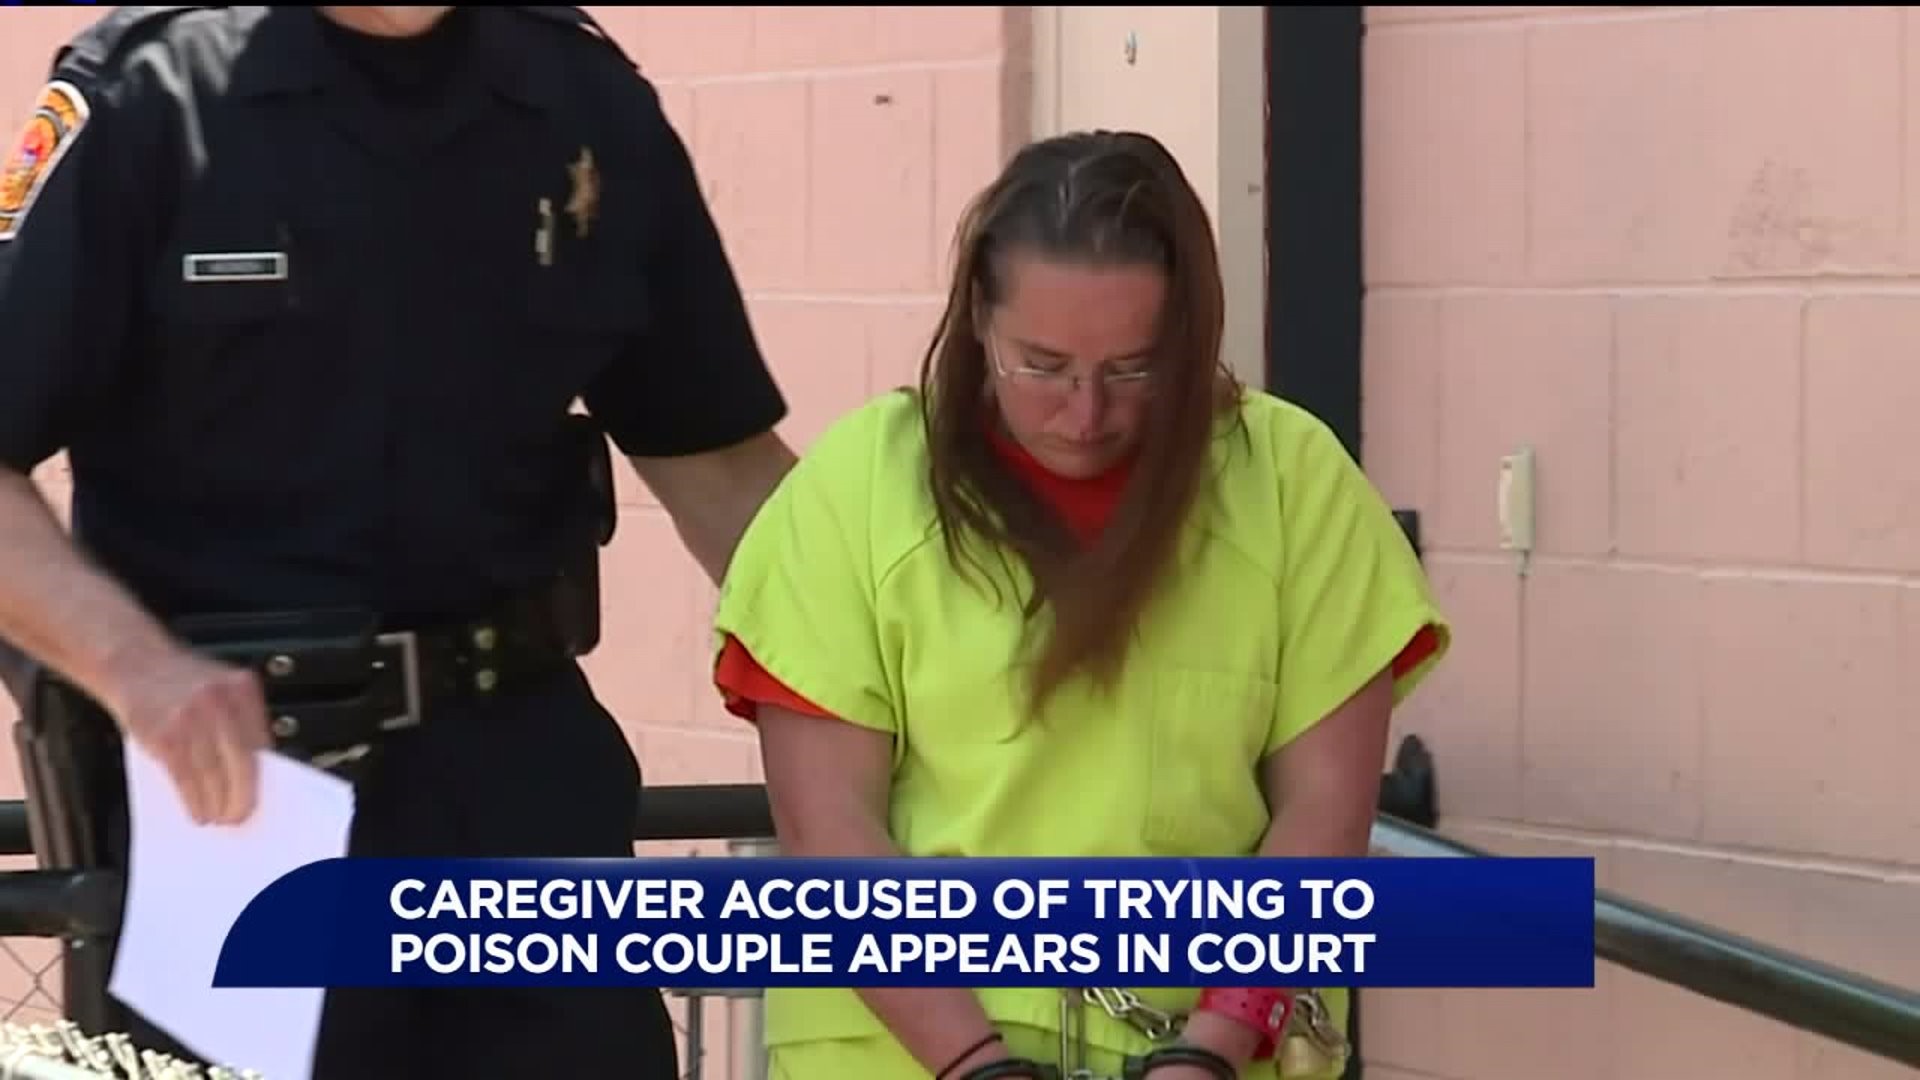 Court Hearing for Caregiver Accused of Trying to Kill Couple